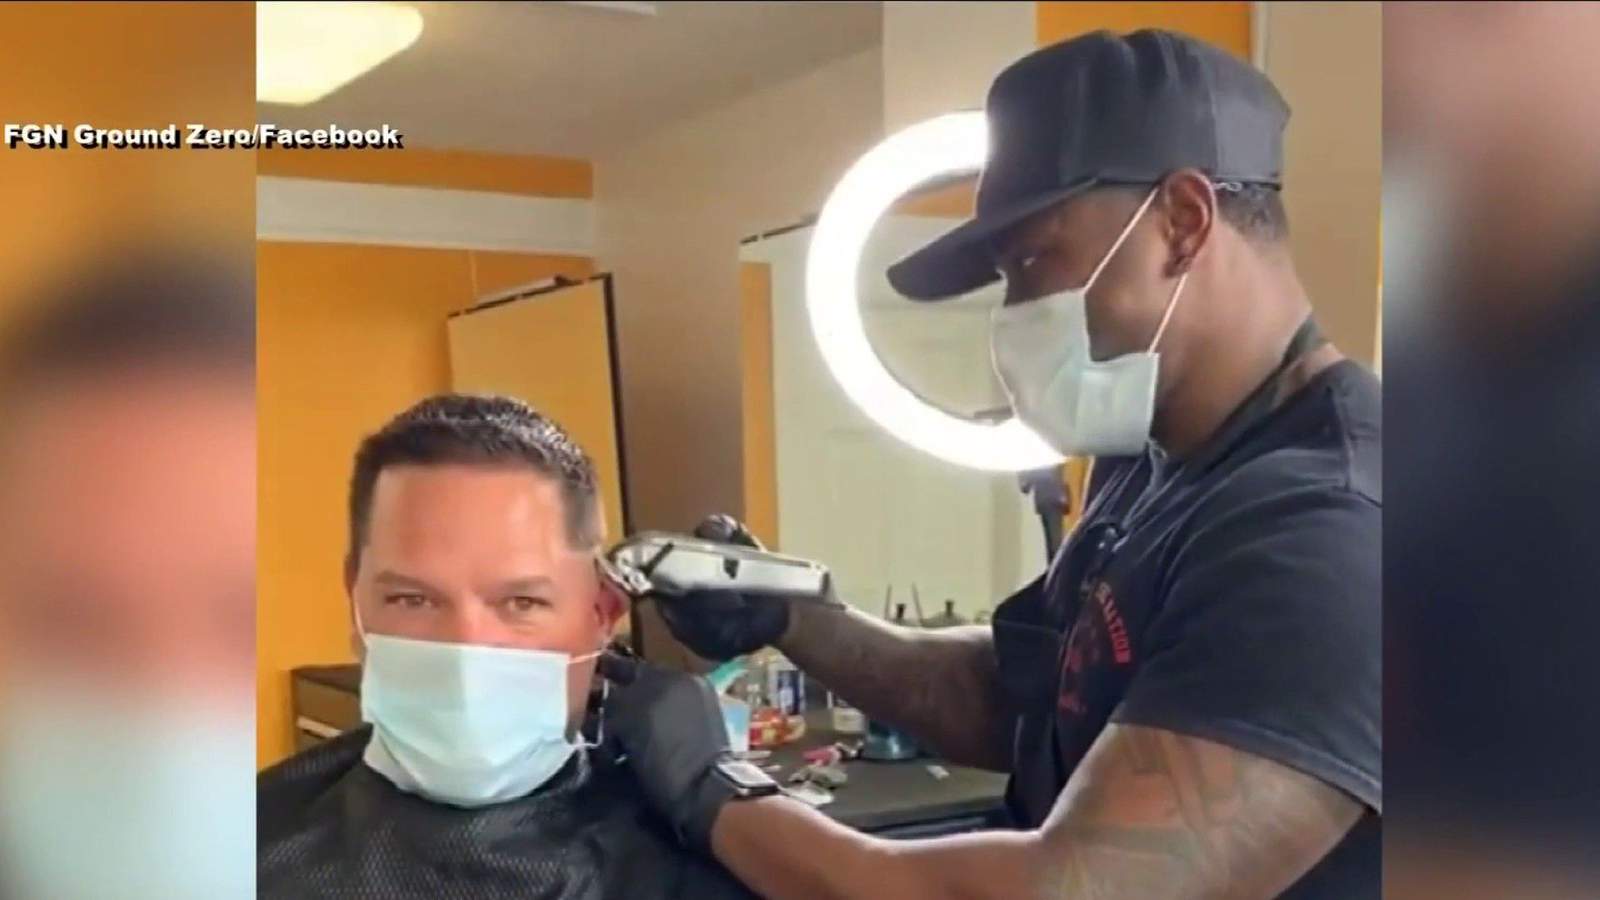 Roanoke barbershop creates video to spread positive message in response to national unrest